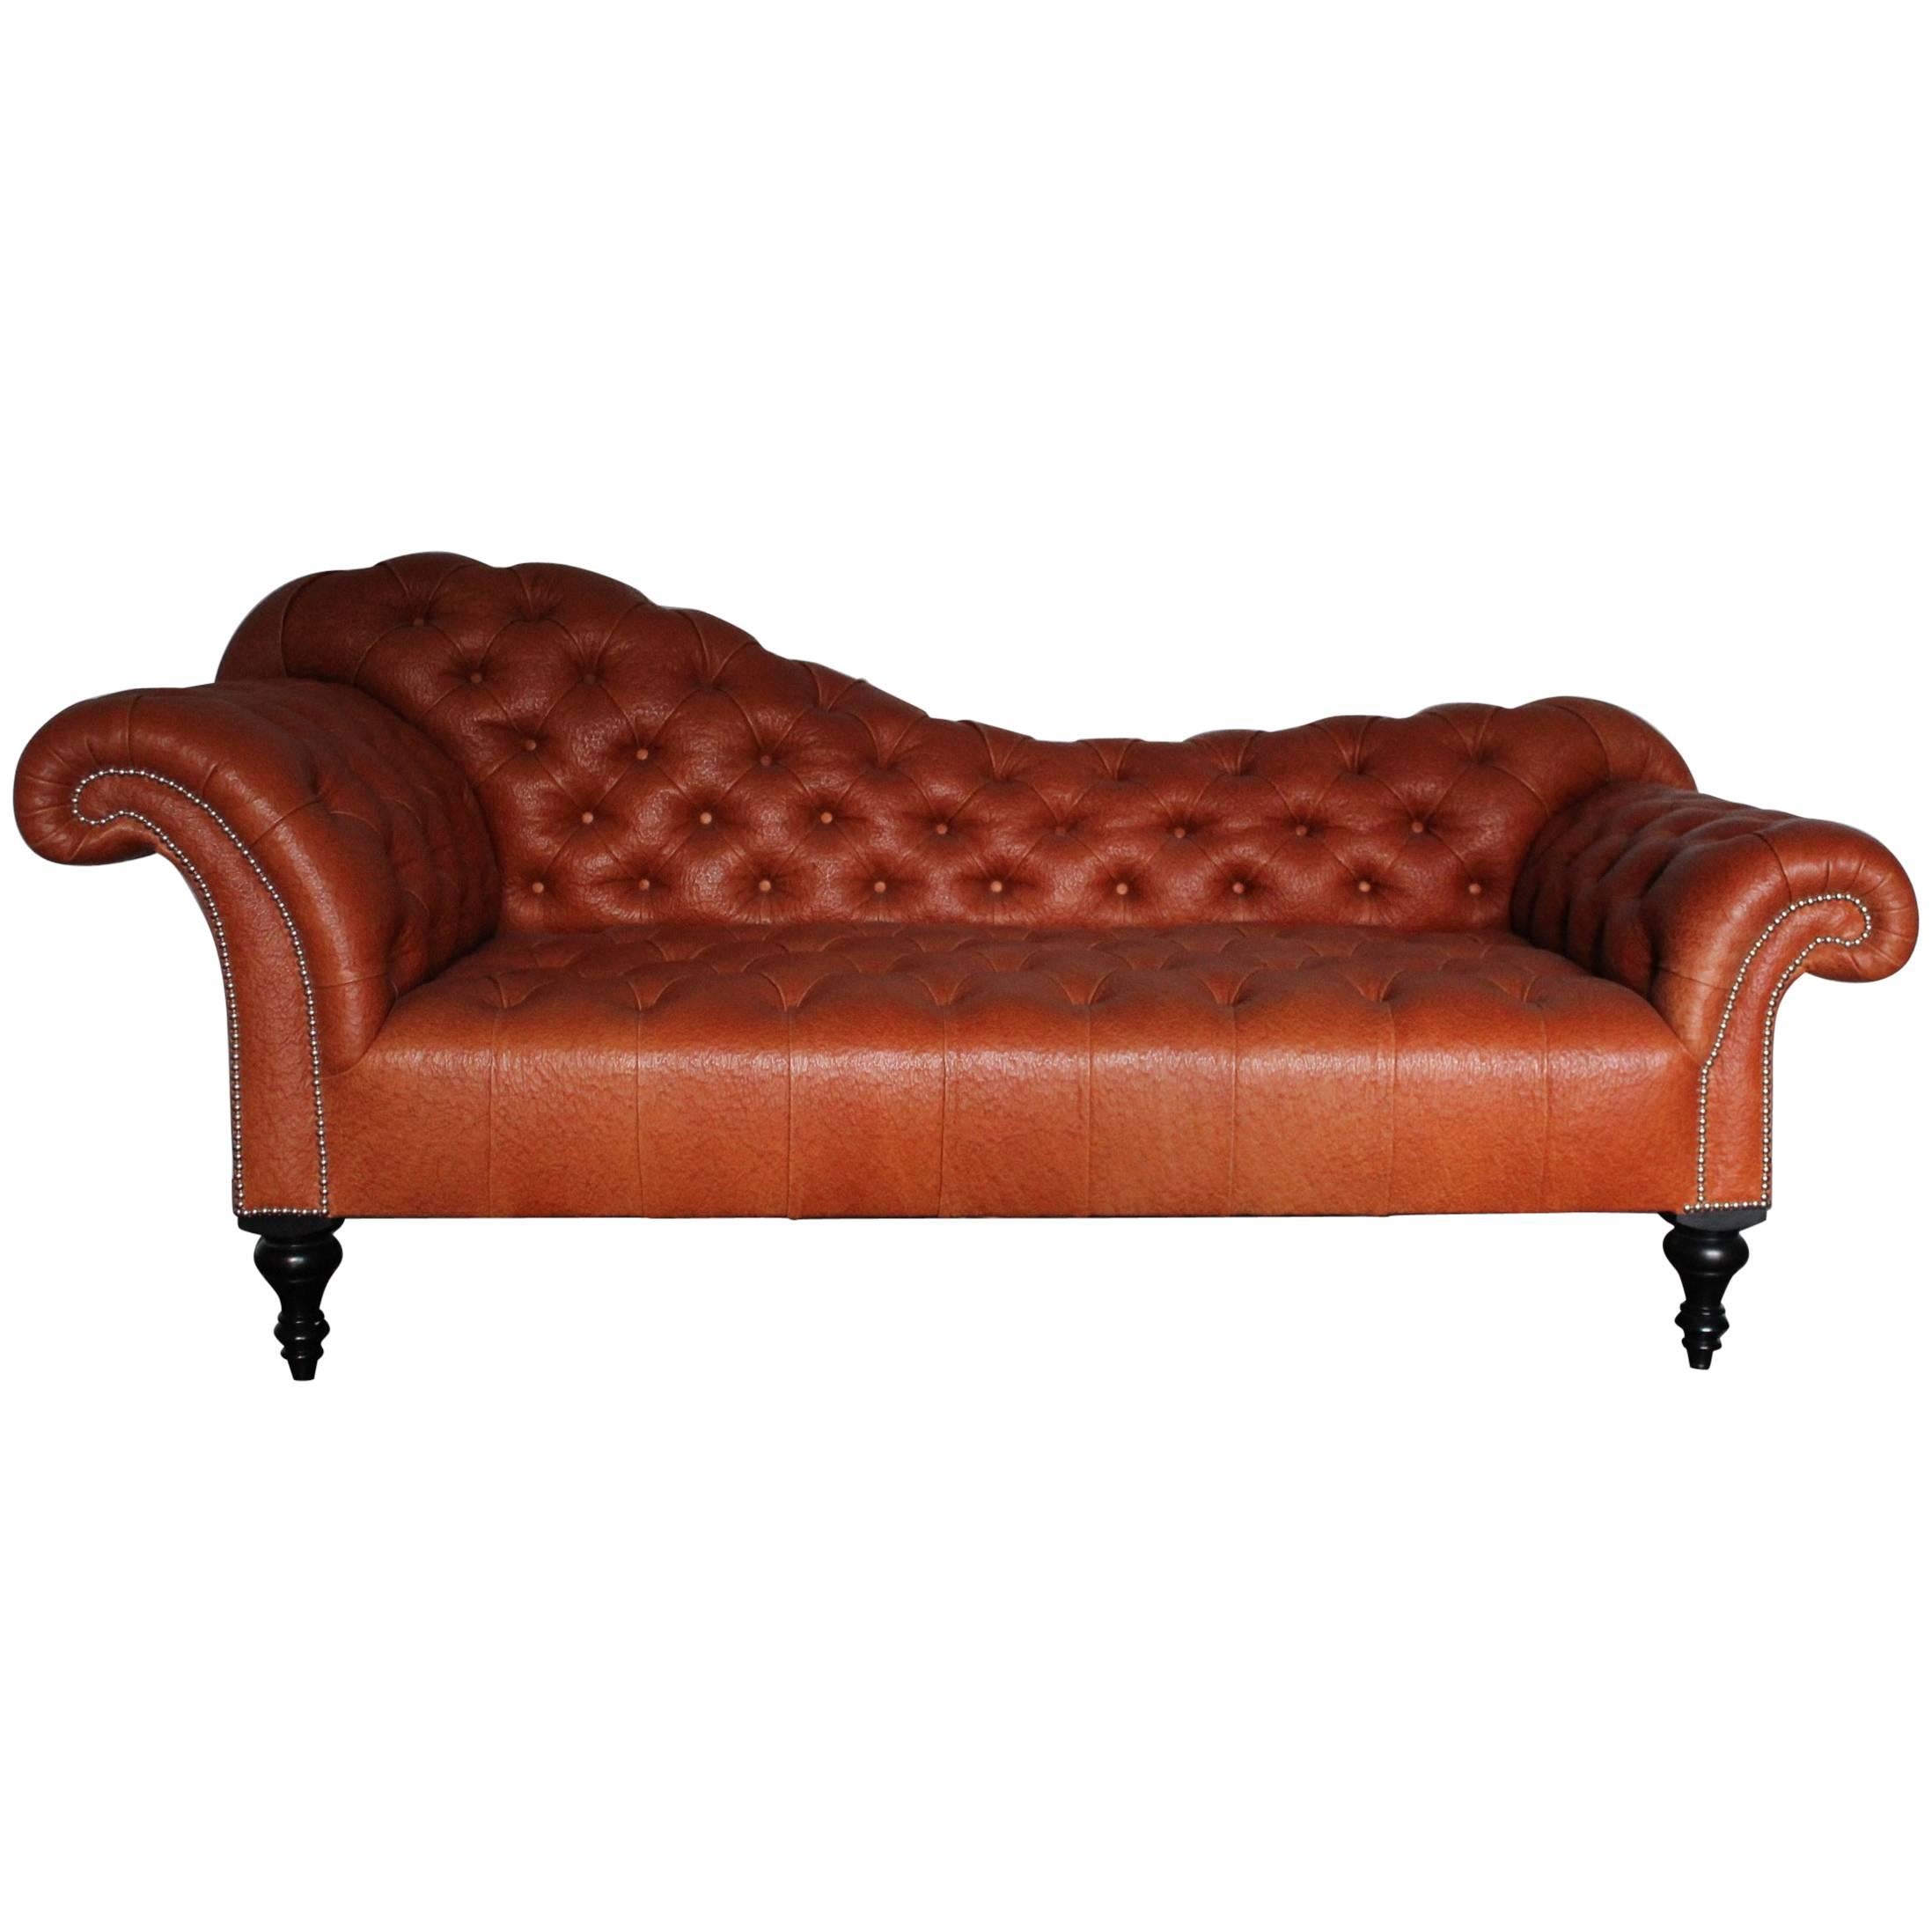 George Smith “Dog-Kennel Bed” Sofa/Chaise in Special-Order Tan-Brown Leather